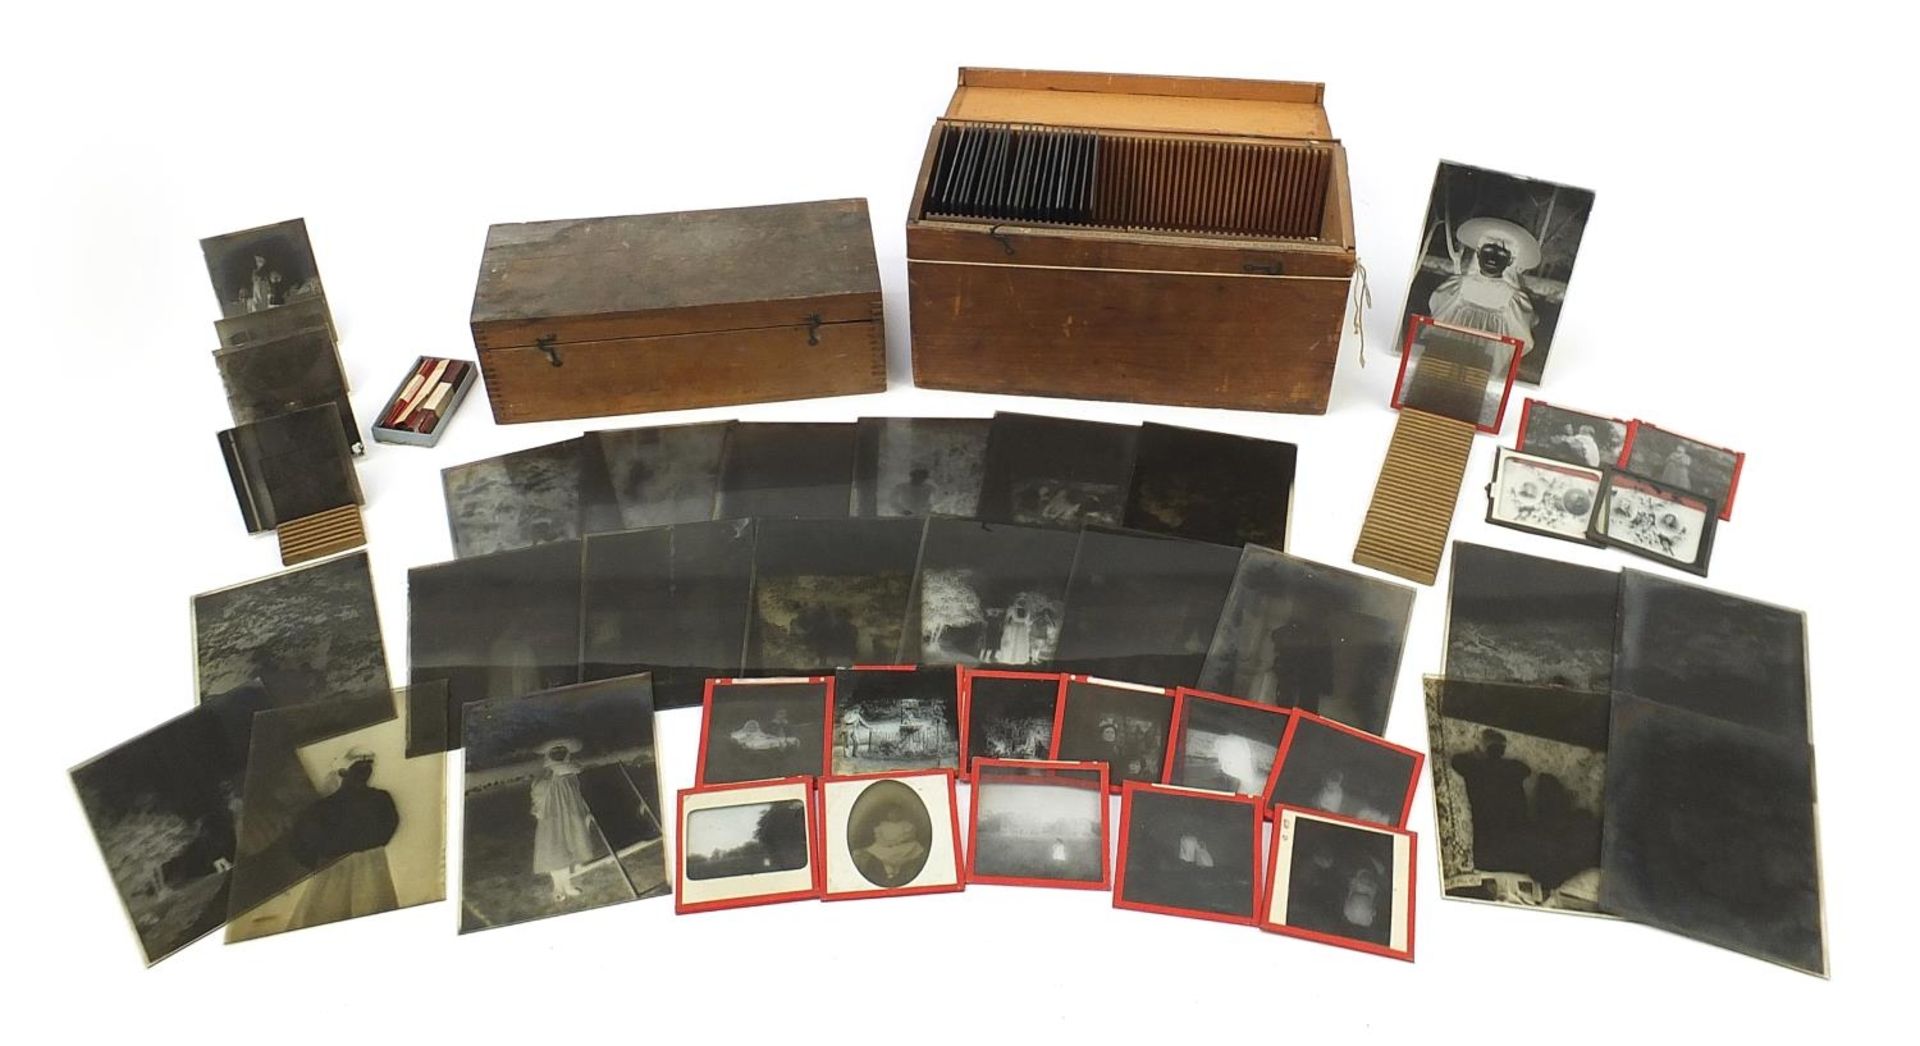 Collection of 19th century social history black and white glass slides arranged in two cases